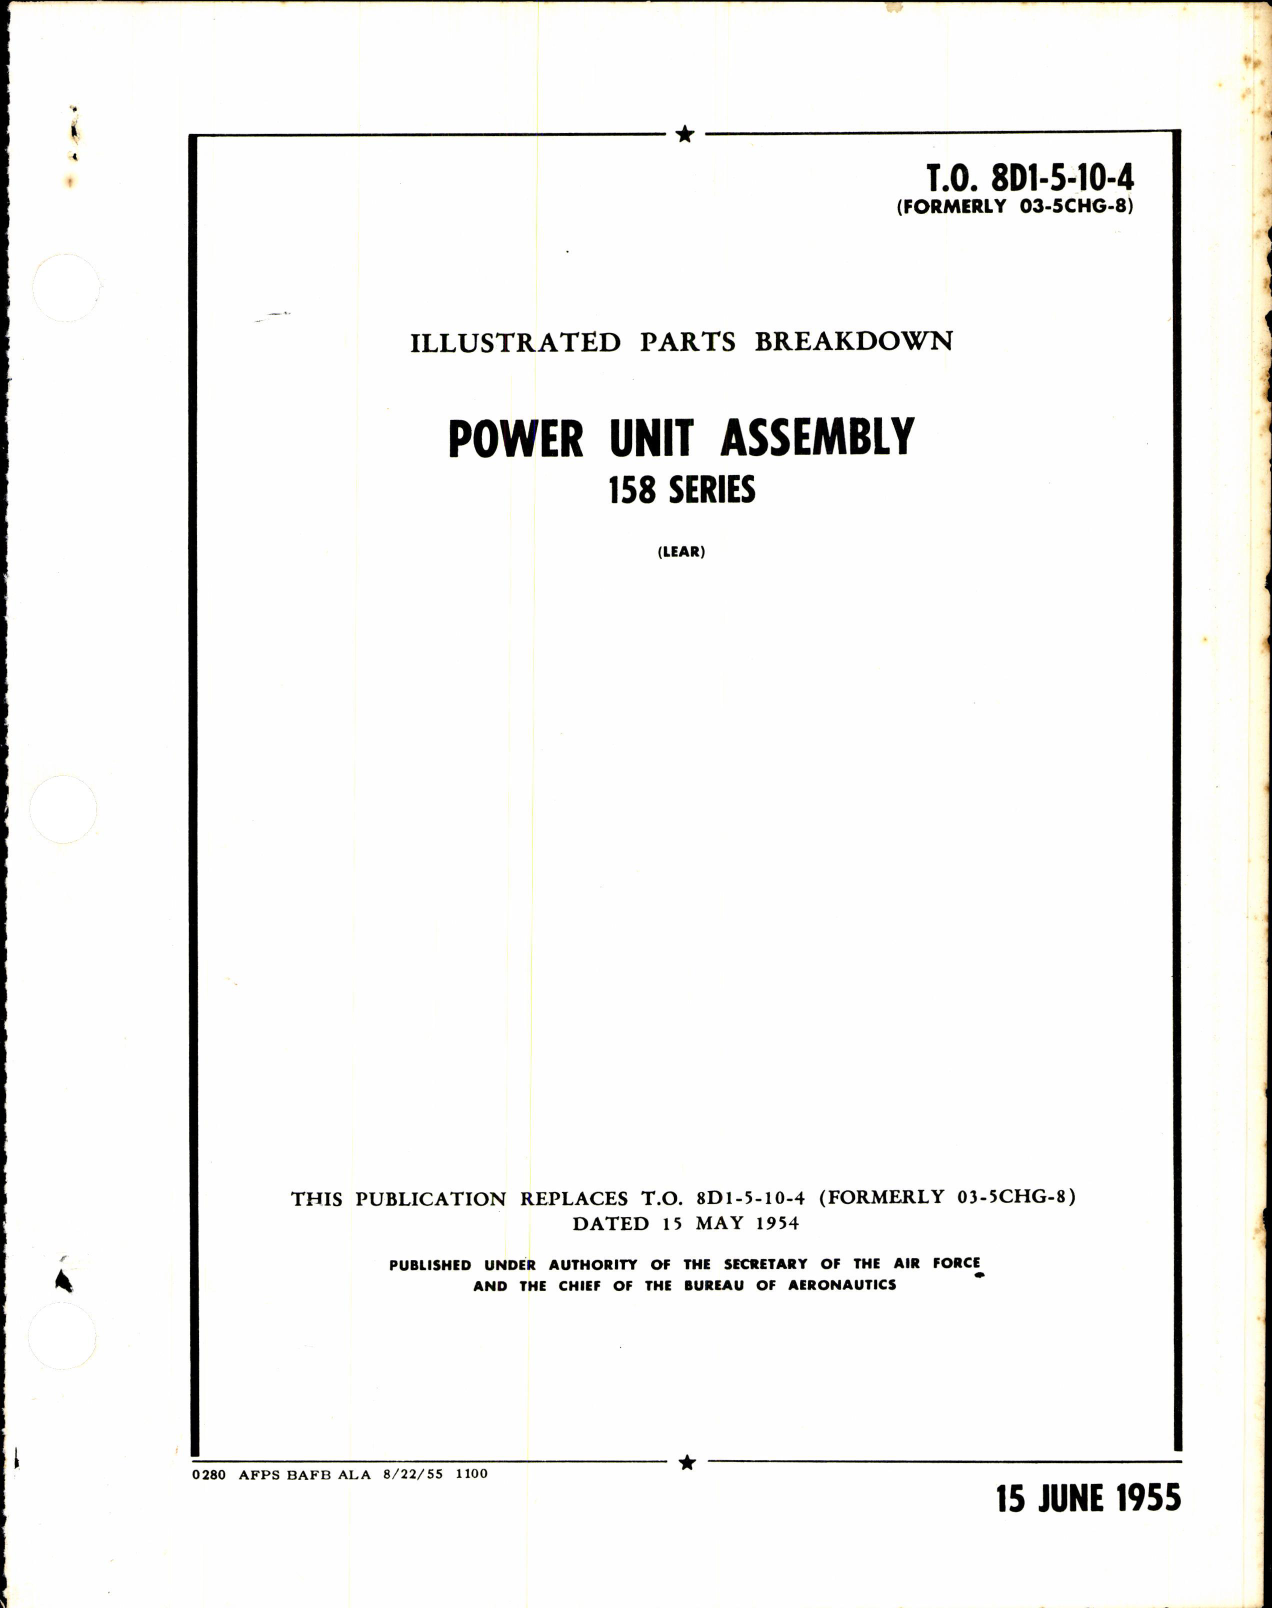 Sample page 1 from AirCorps Library document: Illustrated Parts Breakdown for Power Unit Assembly 158 Series